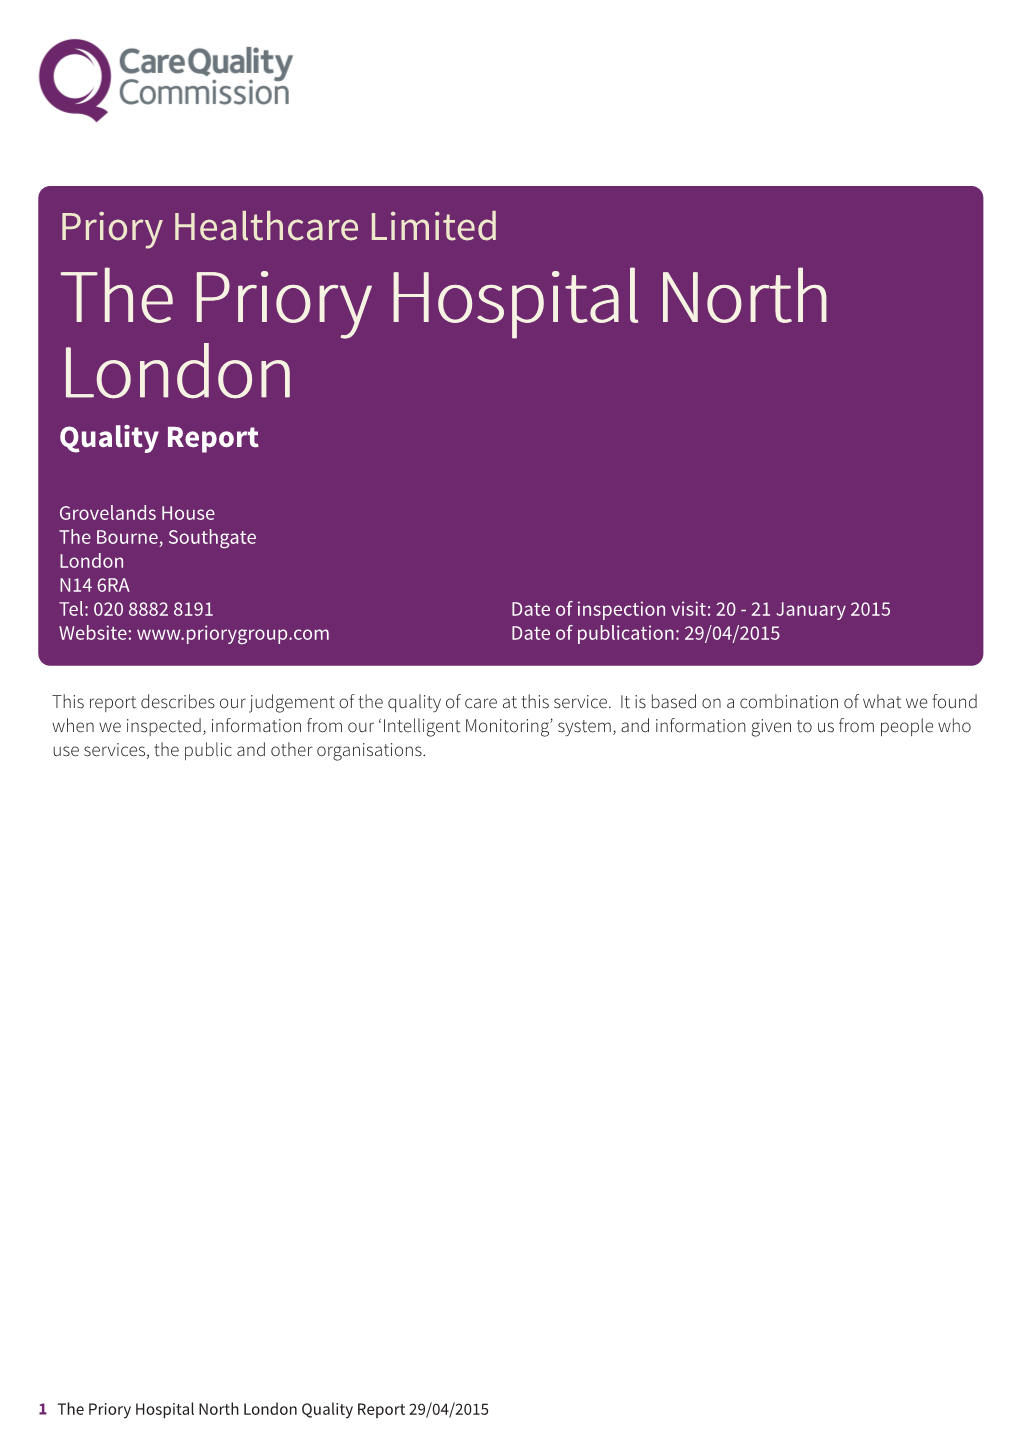 The Priory Hospital North London Quality Report